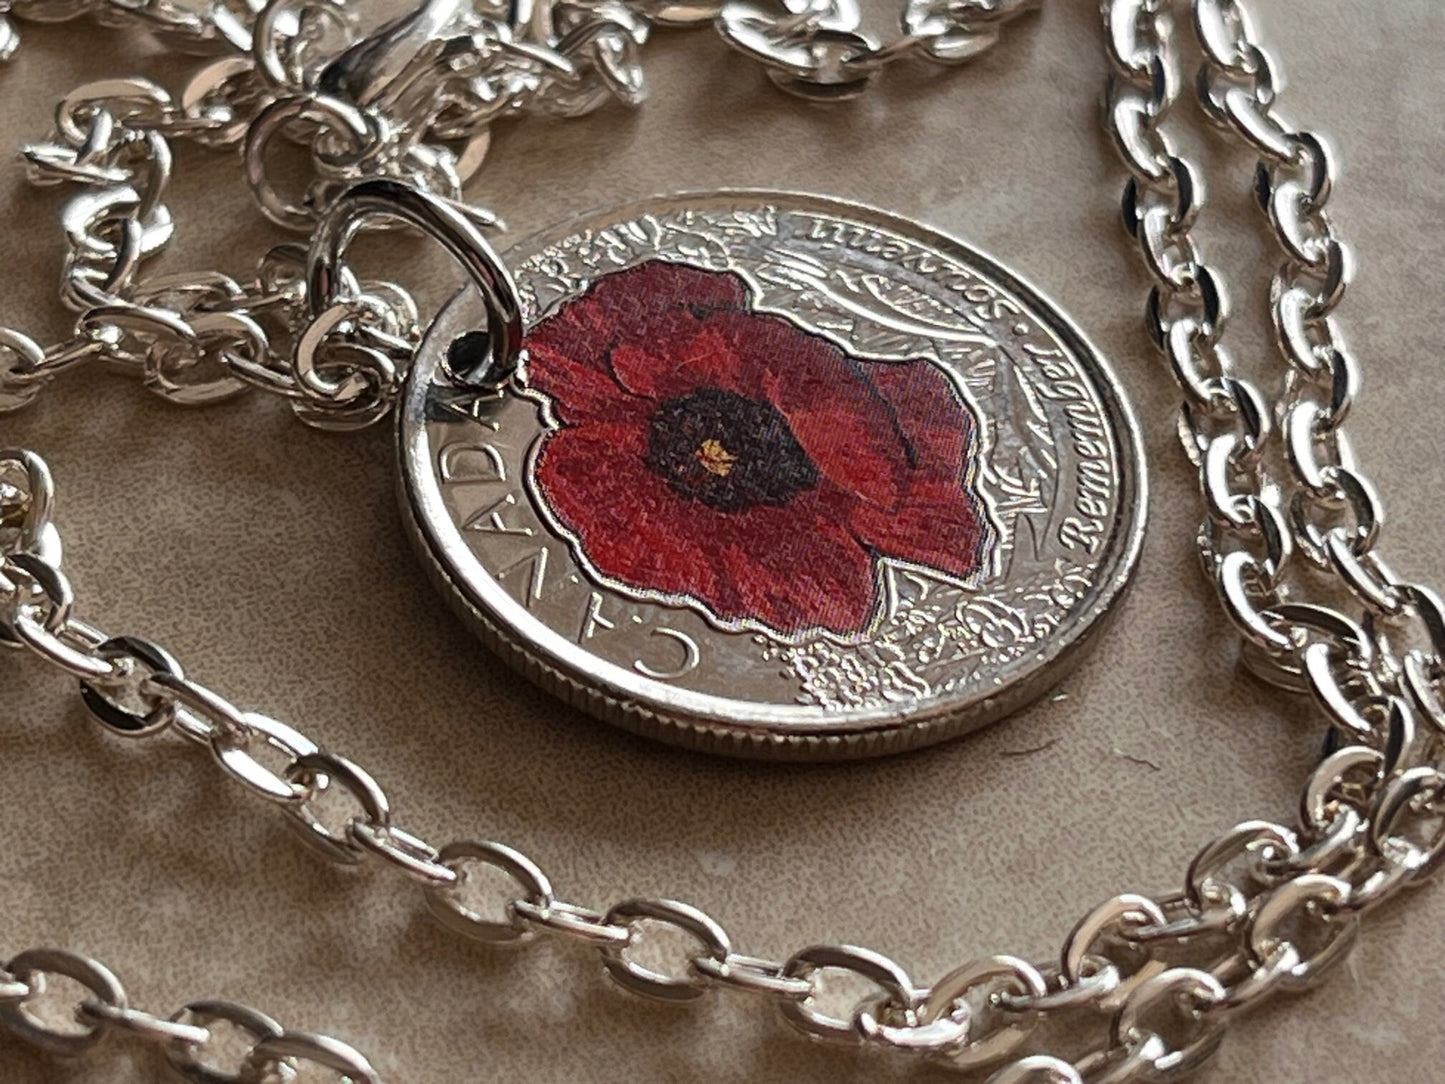 Canadian Quarter Coin Necklace 2015 Red Poppy Coloured Uncirculated 25 Cents Custom Made Vintage Rare Coins Coin Enthusiast Canada